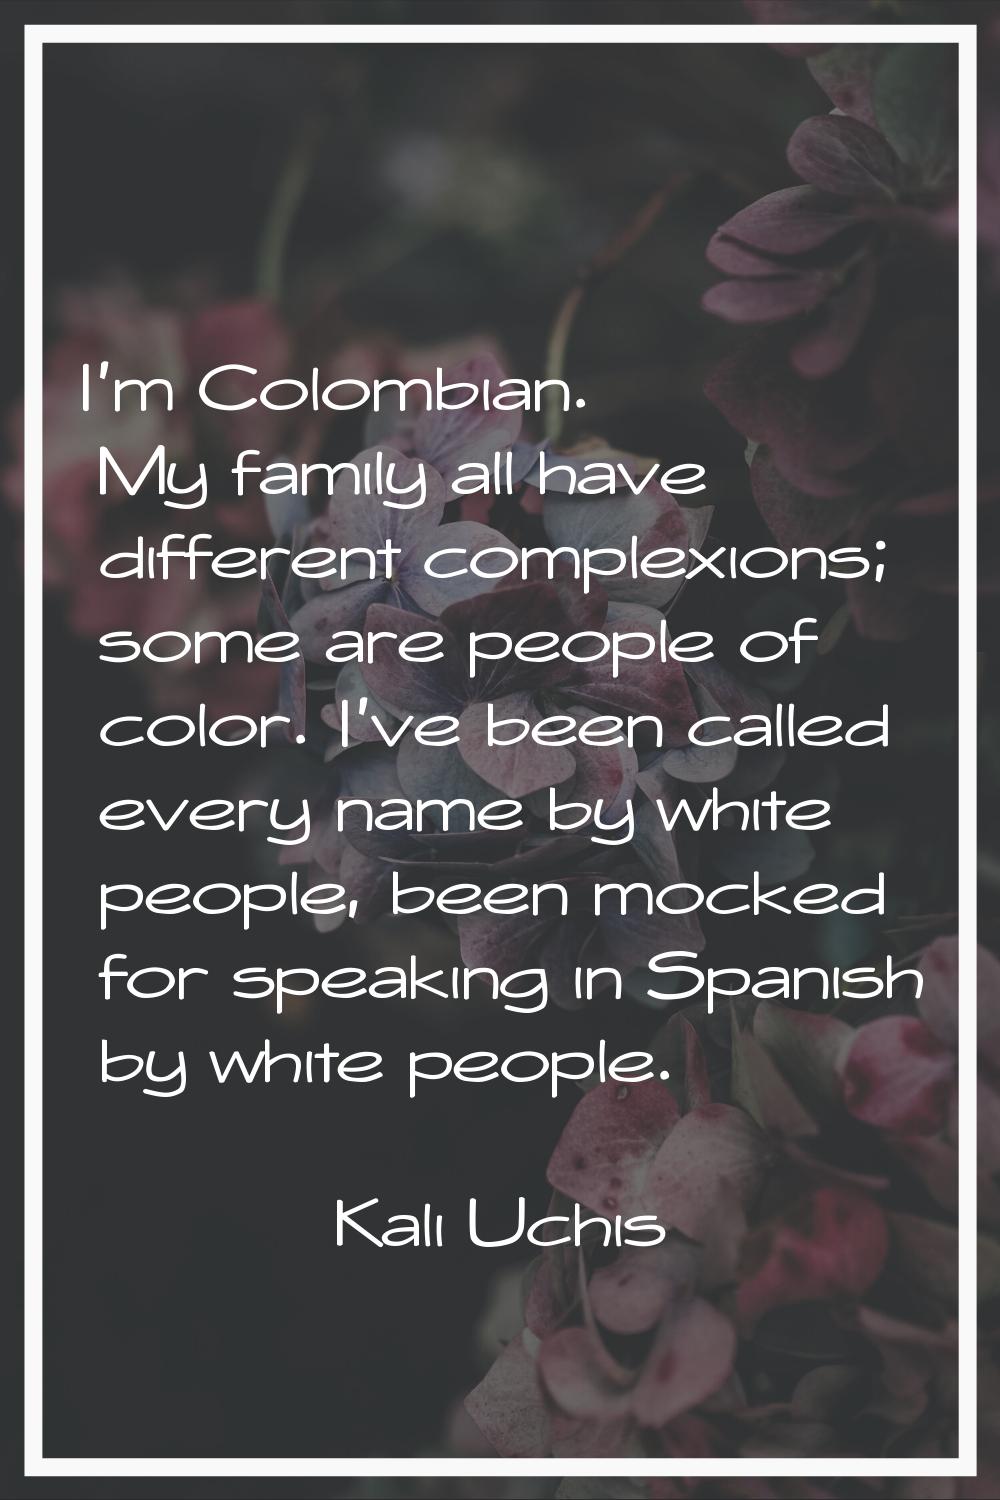 I'm Colombian. My family all have different complexions; some are people of color. I've been called